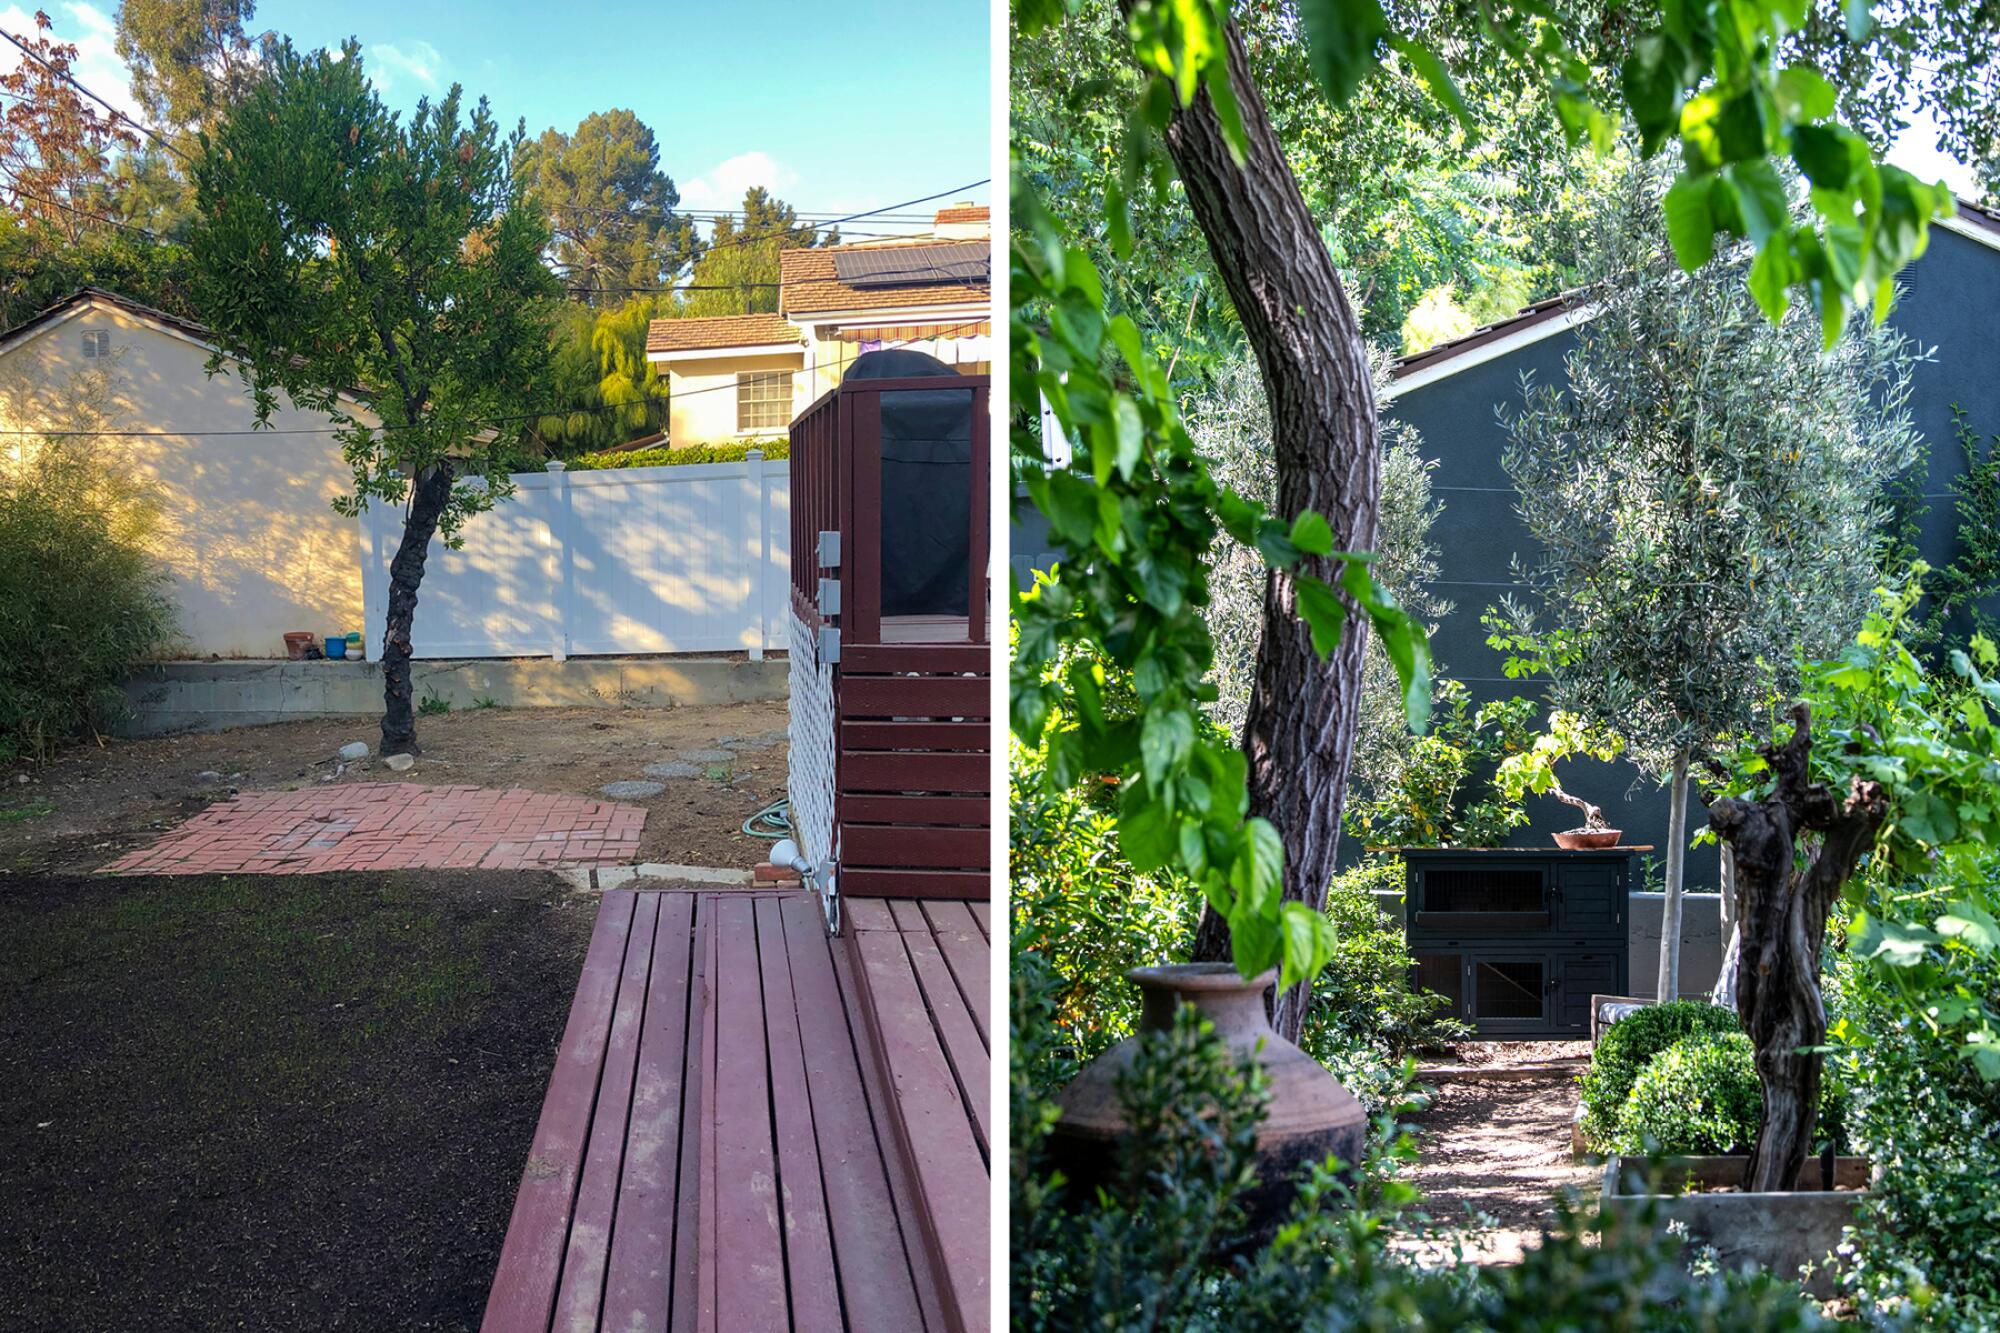 Paul Robbins' backyard before and after